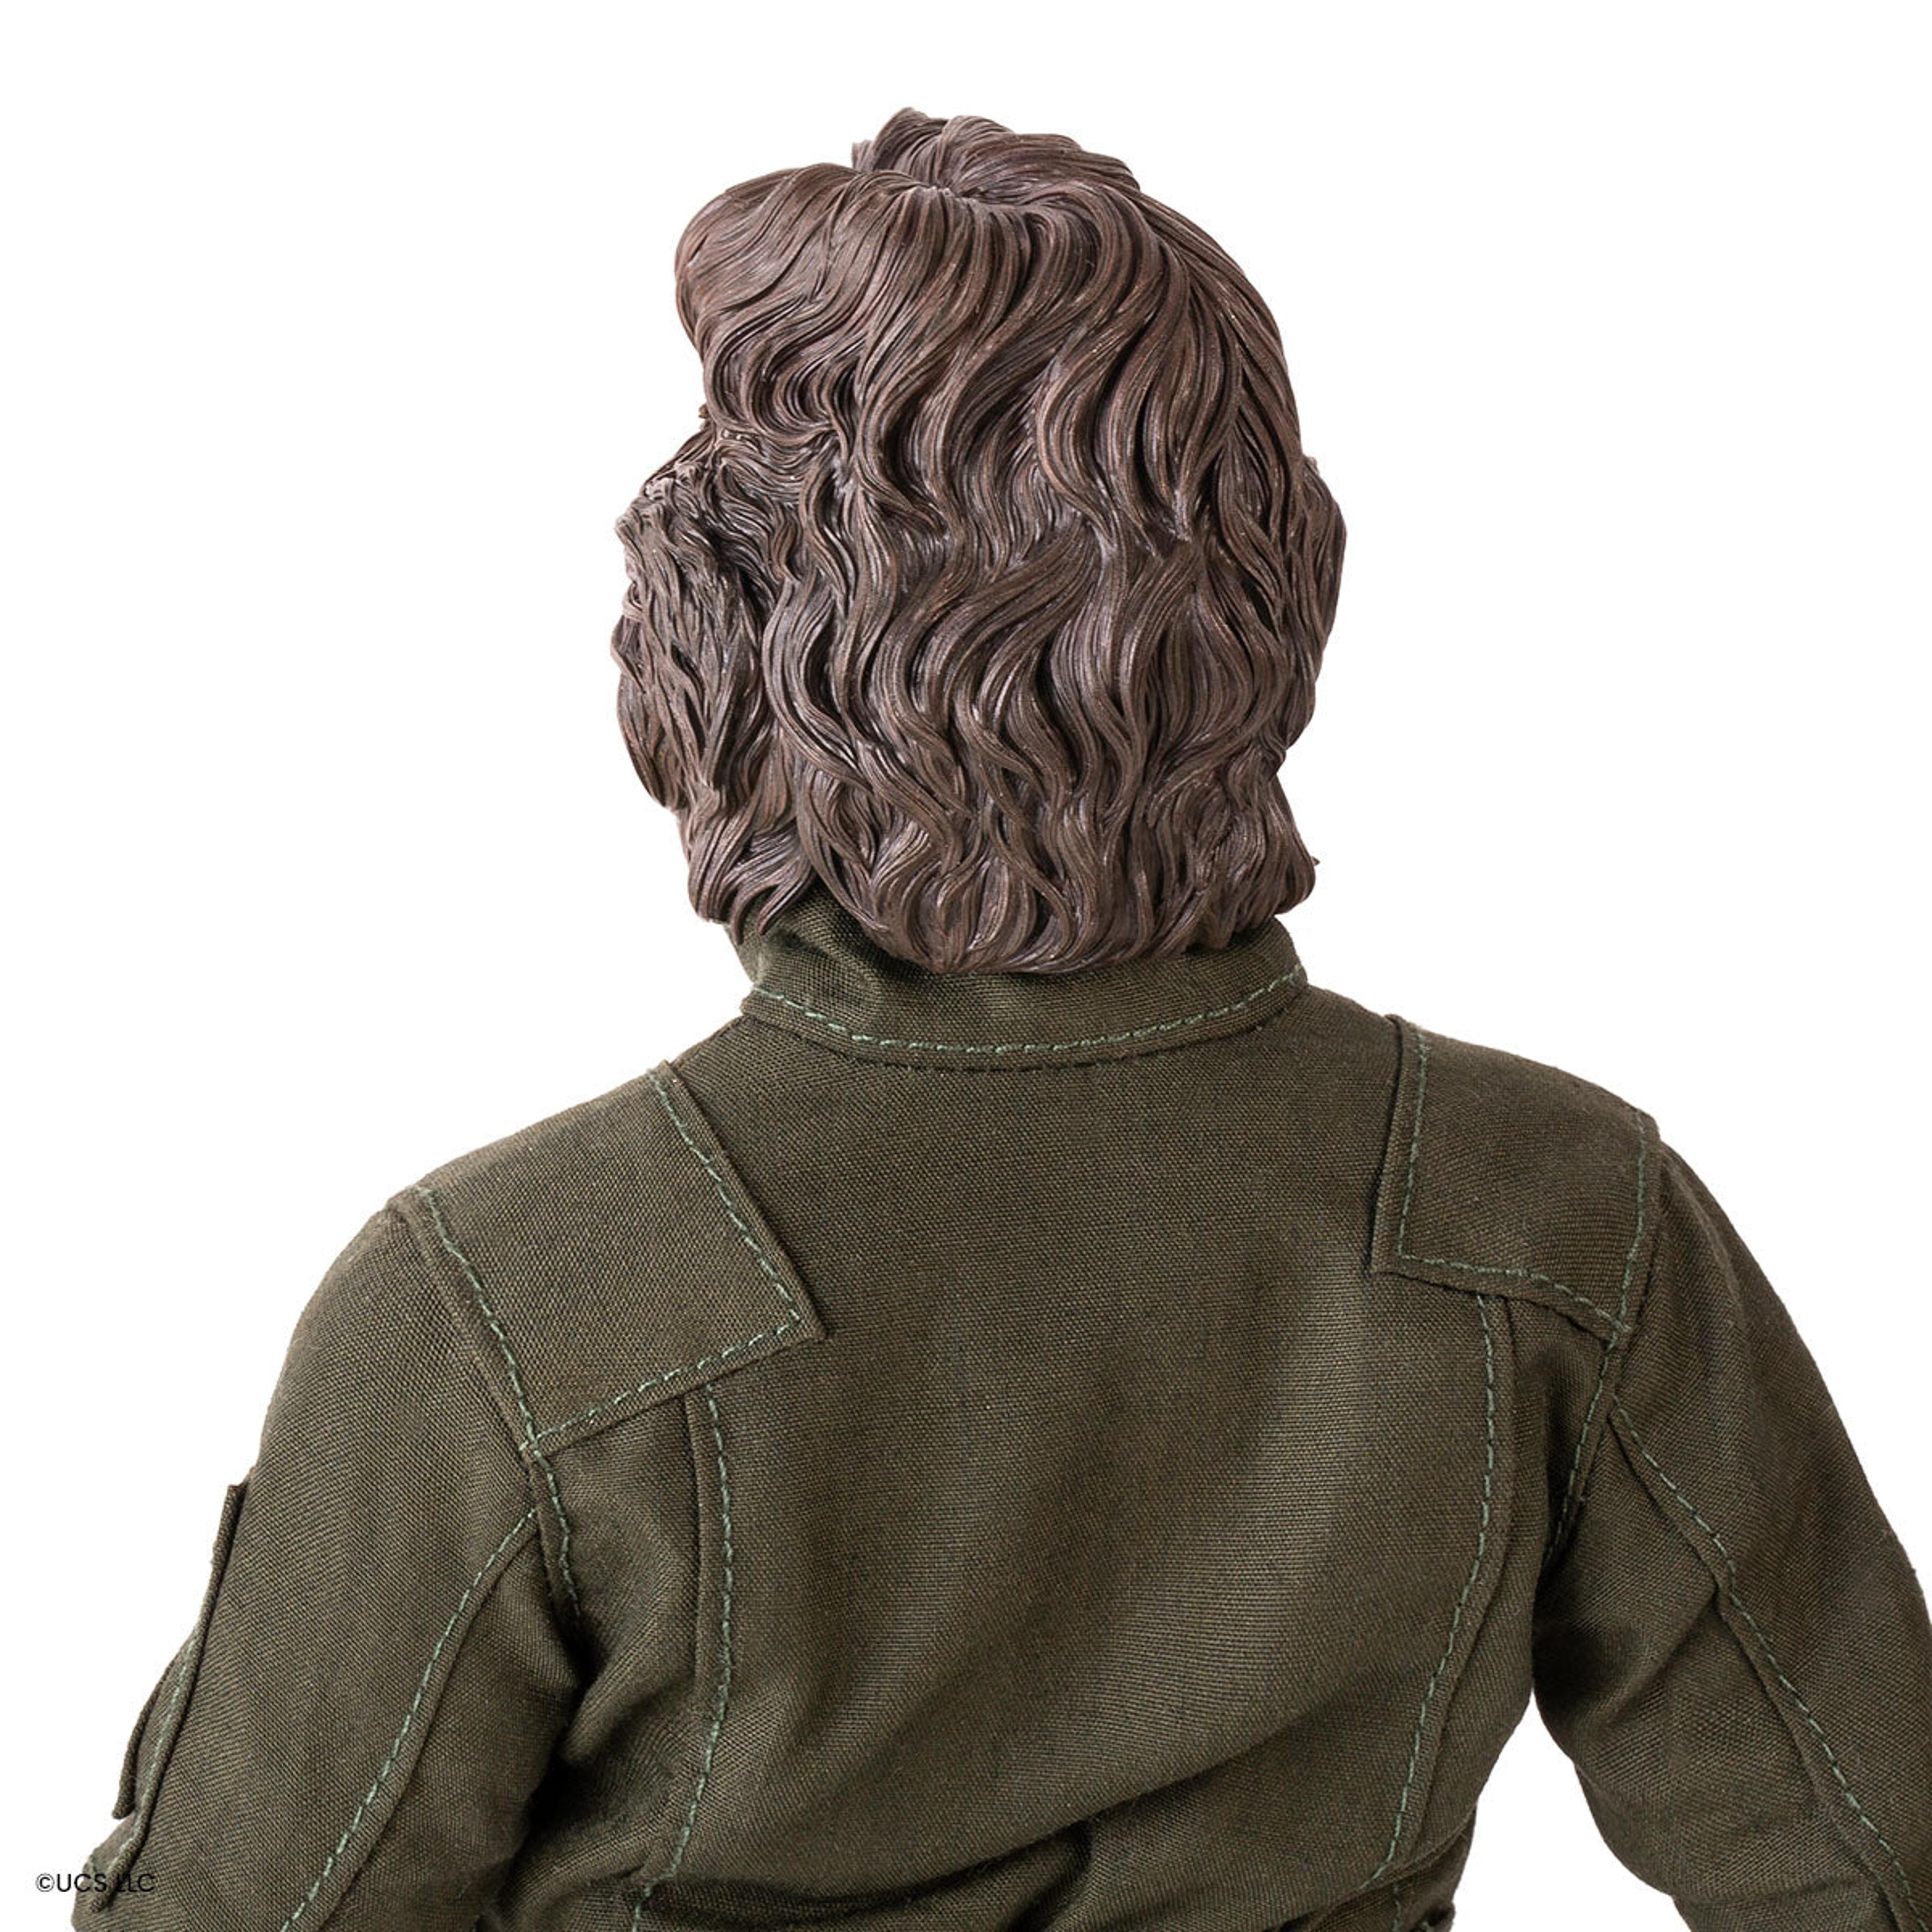 Alternate View 22 of The Thing: MacReady 1/6 Scale Figure